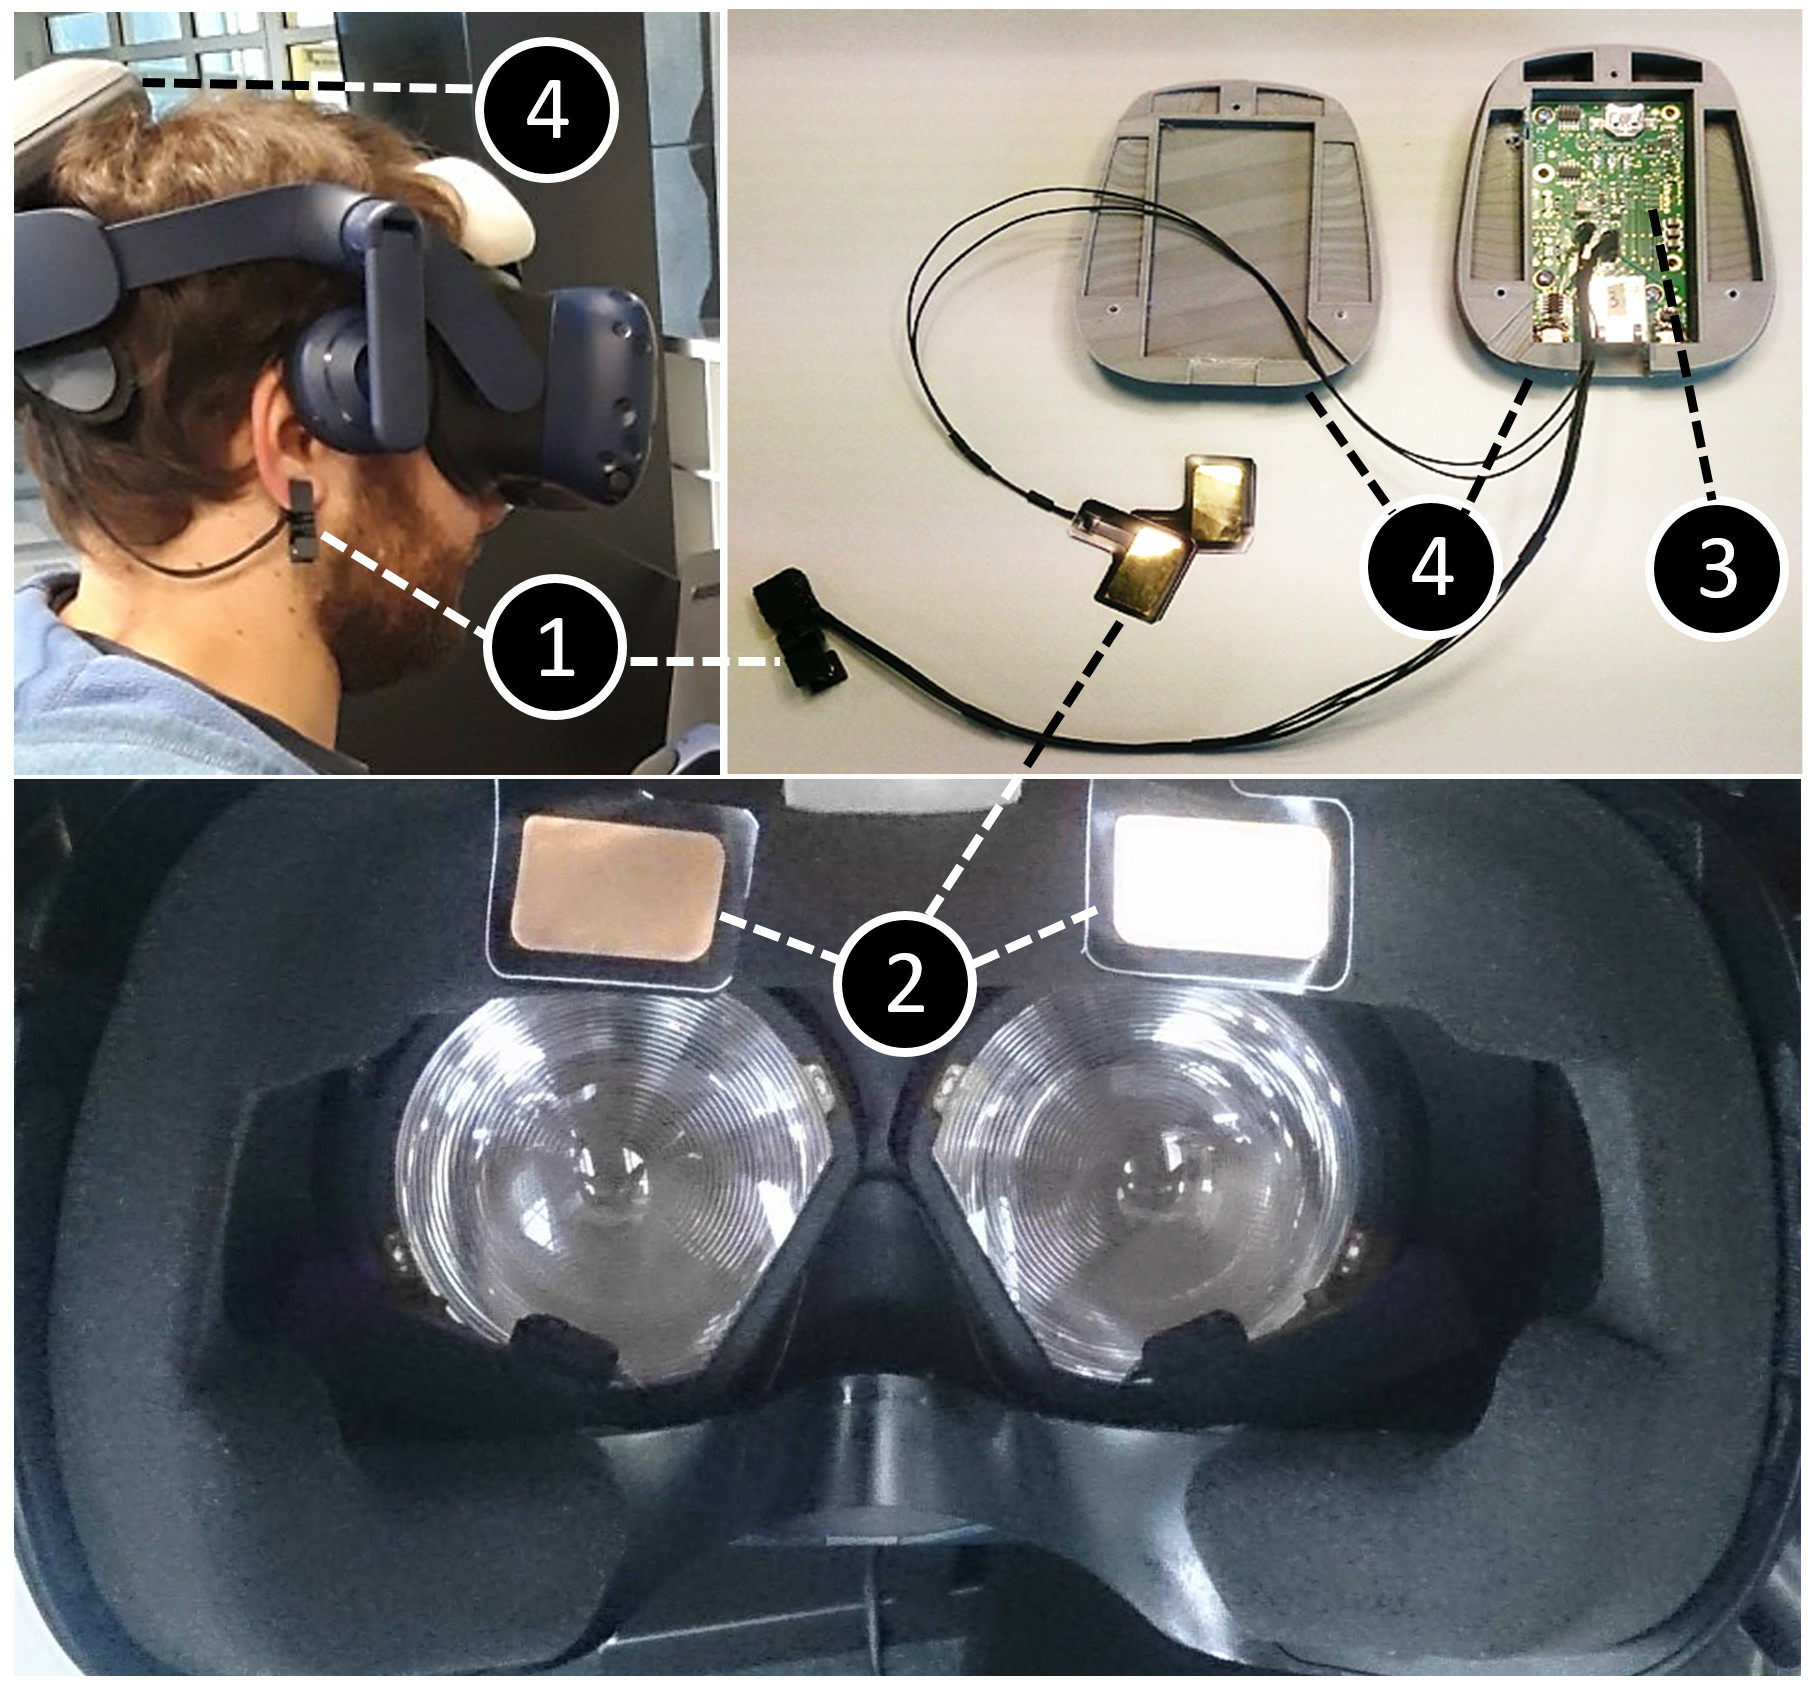 Hardware solution for the “all-in-one“ solution for the real-time recognition of users’ mental workload in VR. The sensors are placed on a Vive Pro Eye HMD, which has eye-tracking. (1) PPG sensor, (2), electrodes to assess the EDA, (3) electronic card, (4) 3D printed case.